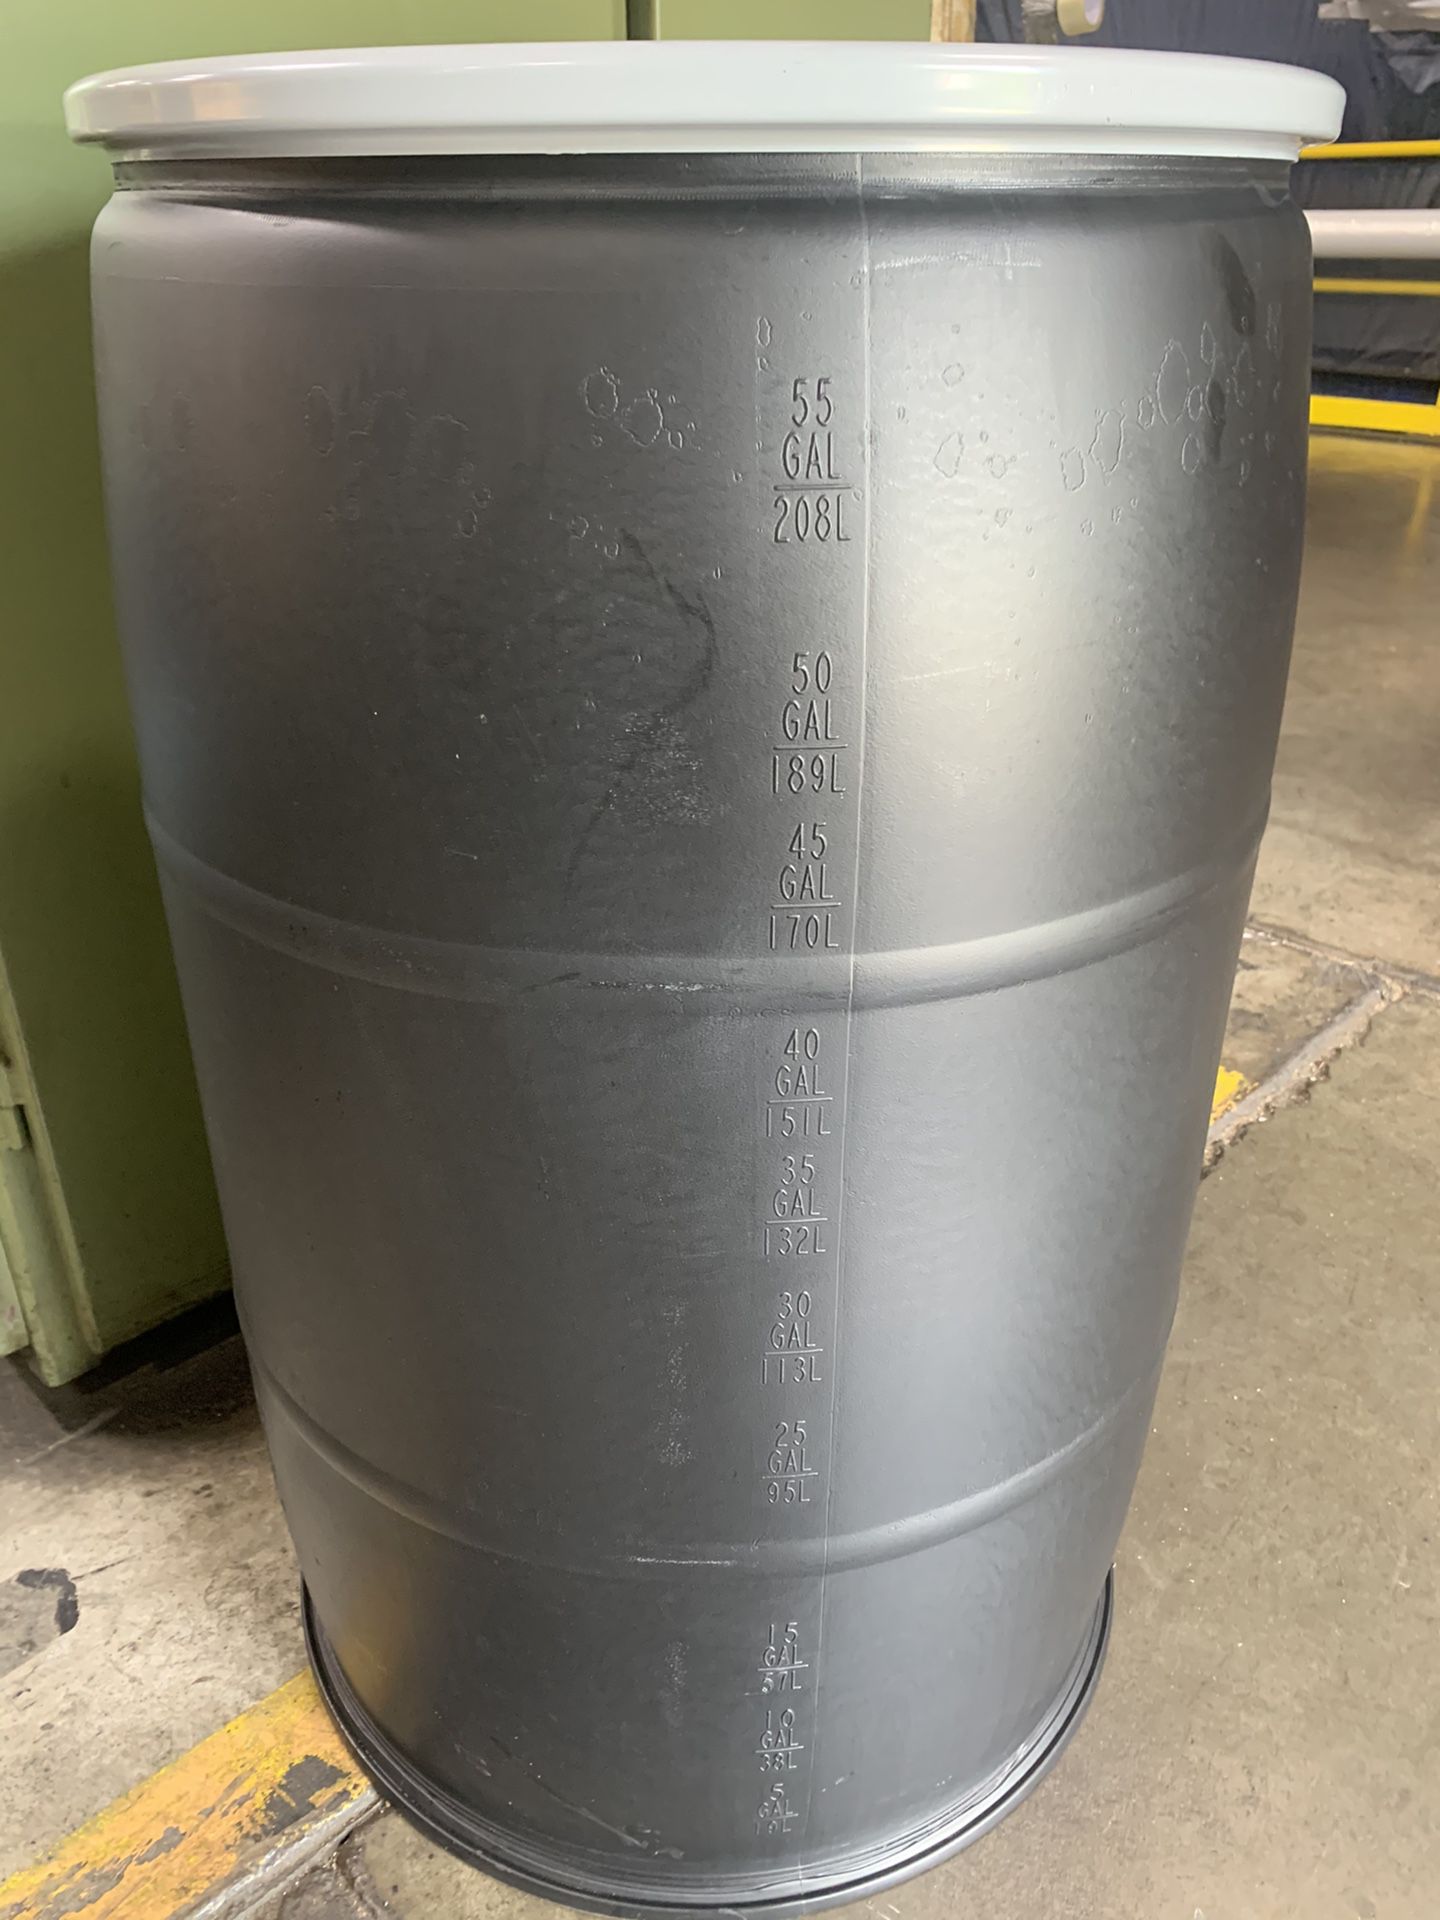 55 gallon clean barrels ready to use for anything rain, water, septic, dog house, storage, shipping, compost, tie downs , floats dock